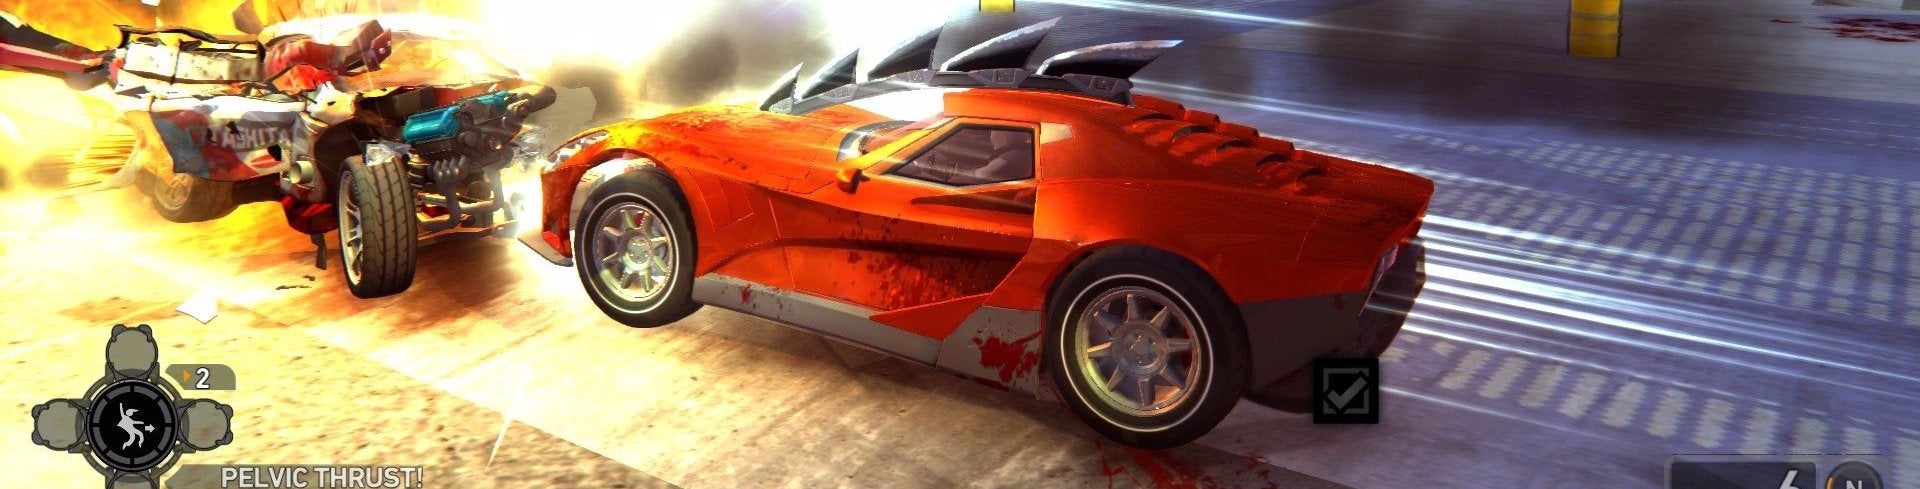 Image for Carmageddon: Reincarnation is still a bit of a mess - although it is a glorious one